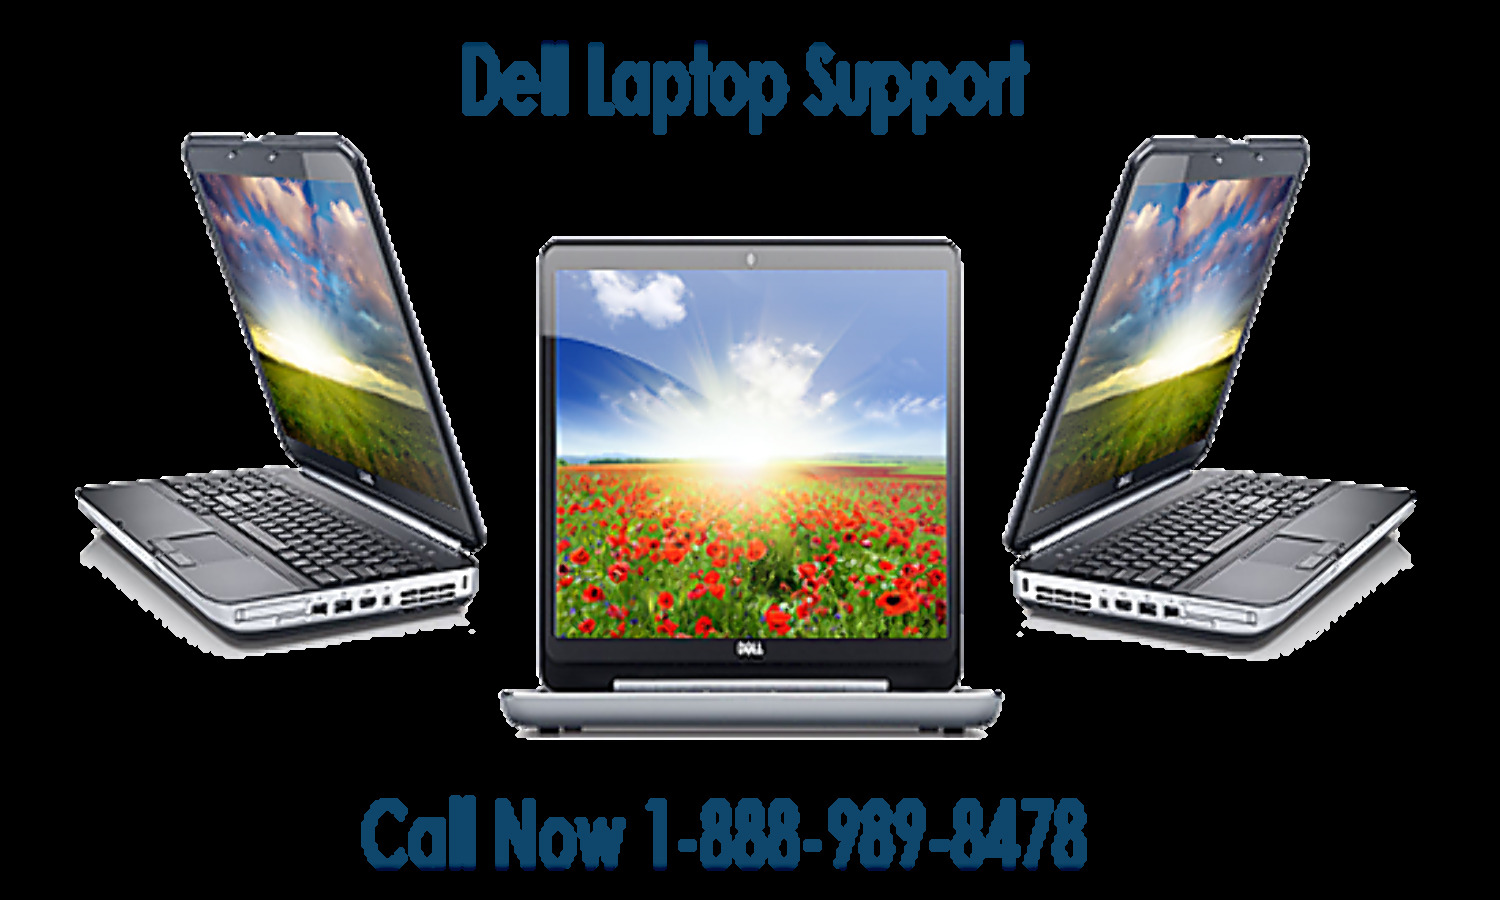 : dell customer service number on Rediff Pages